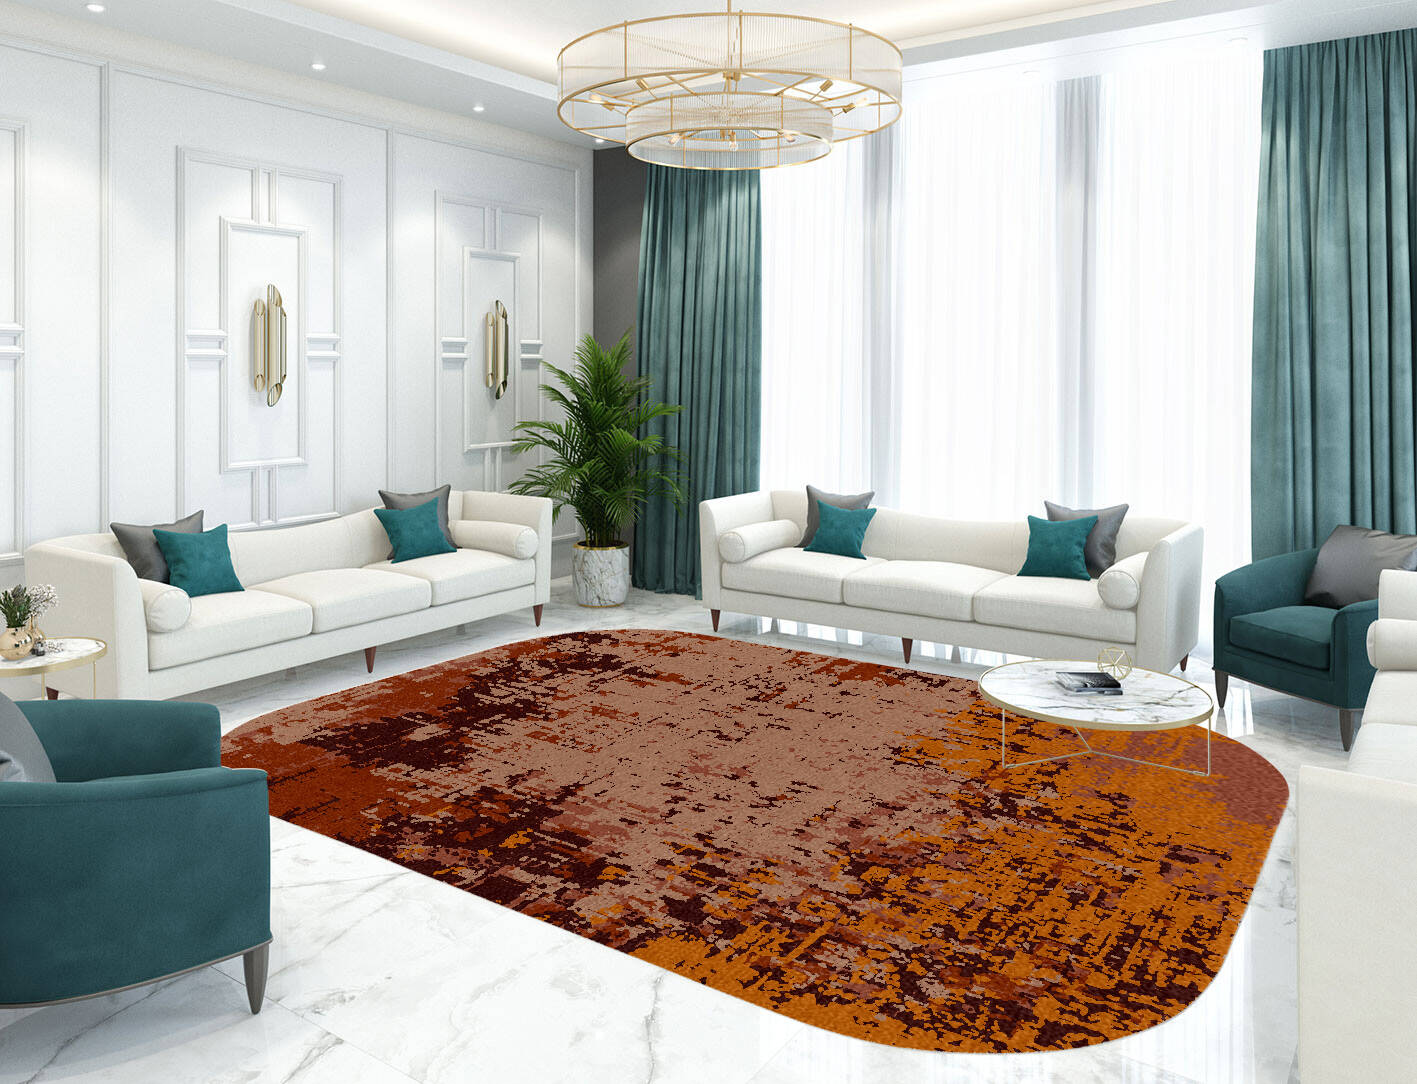 Shades Of Rust Surface Art Oblong Hand Knotted Tibetan Wool Custom Rug by Rug Artisan